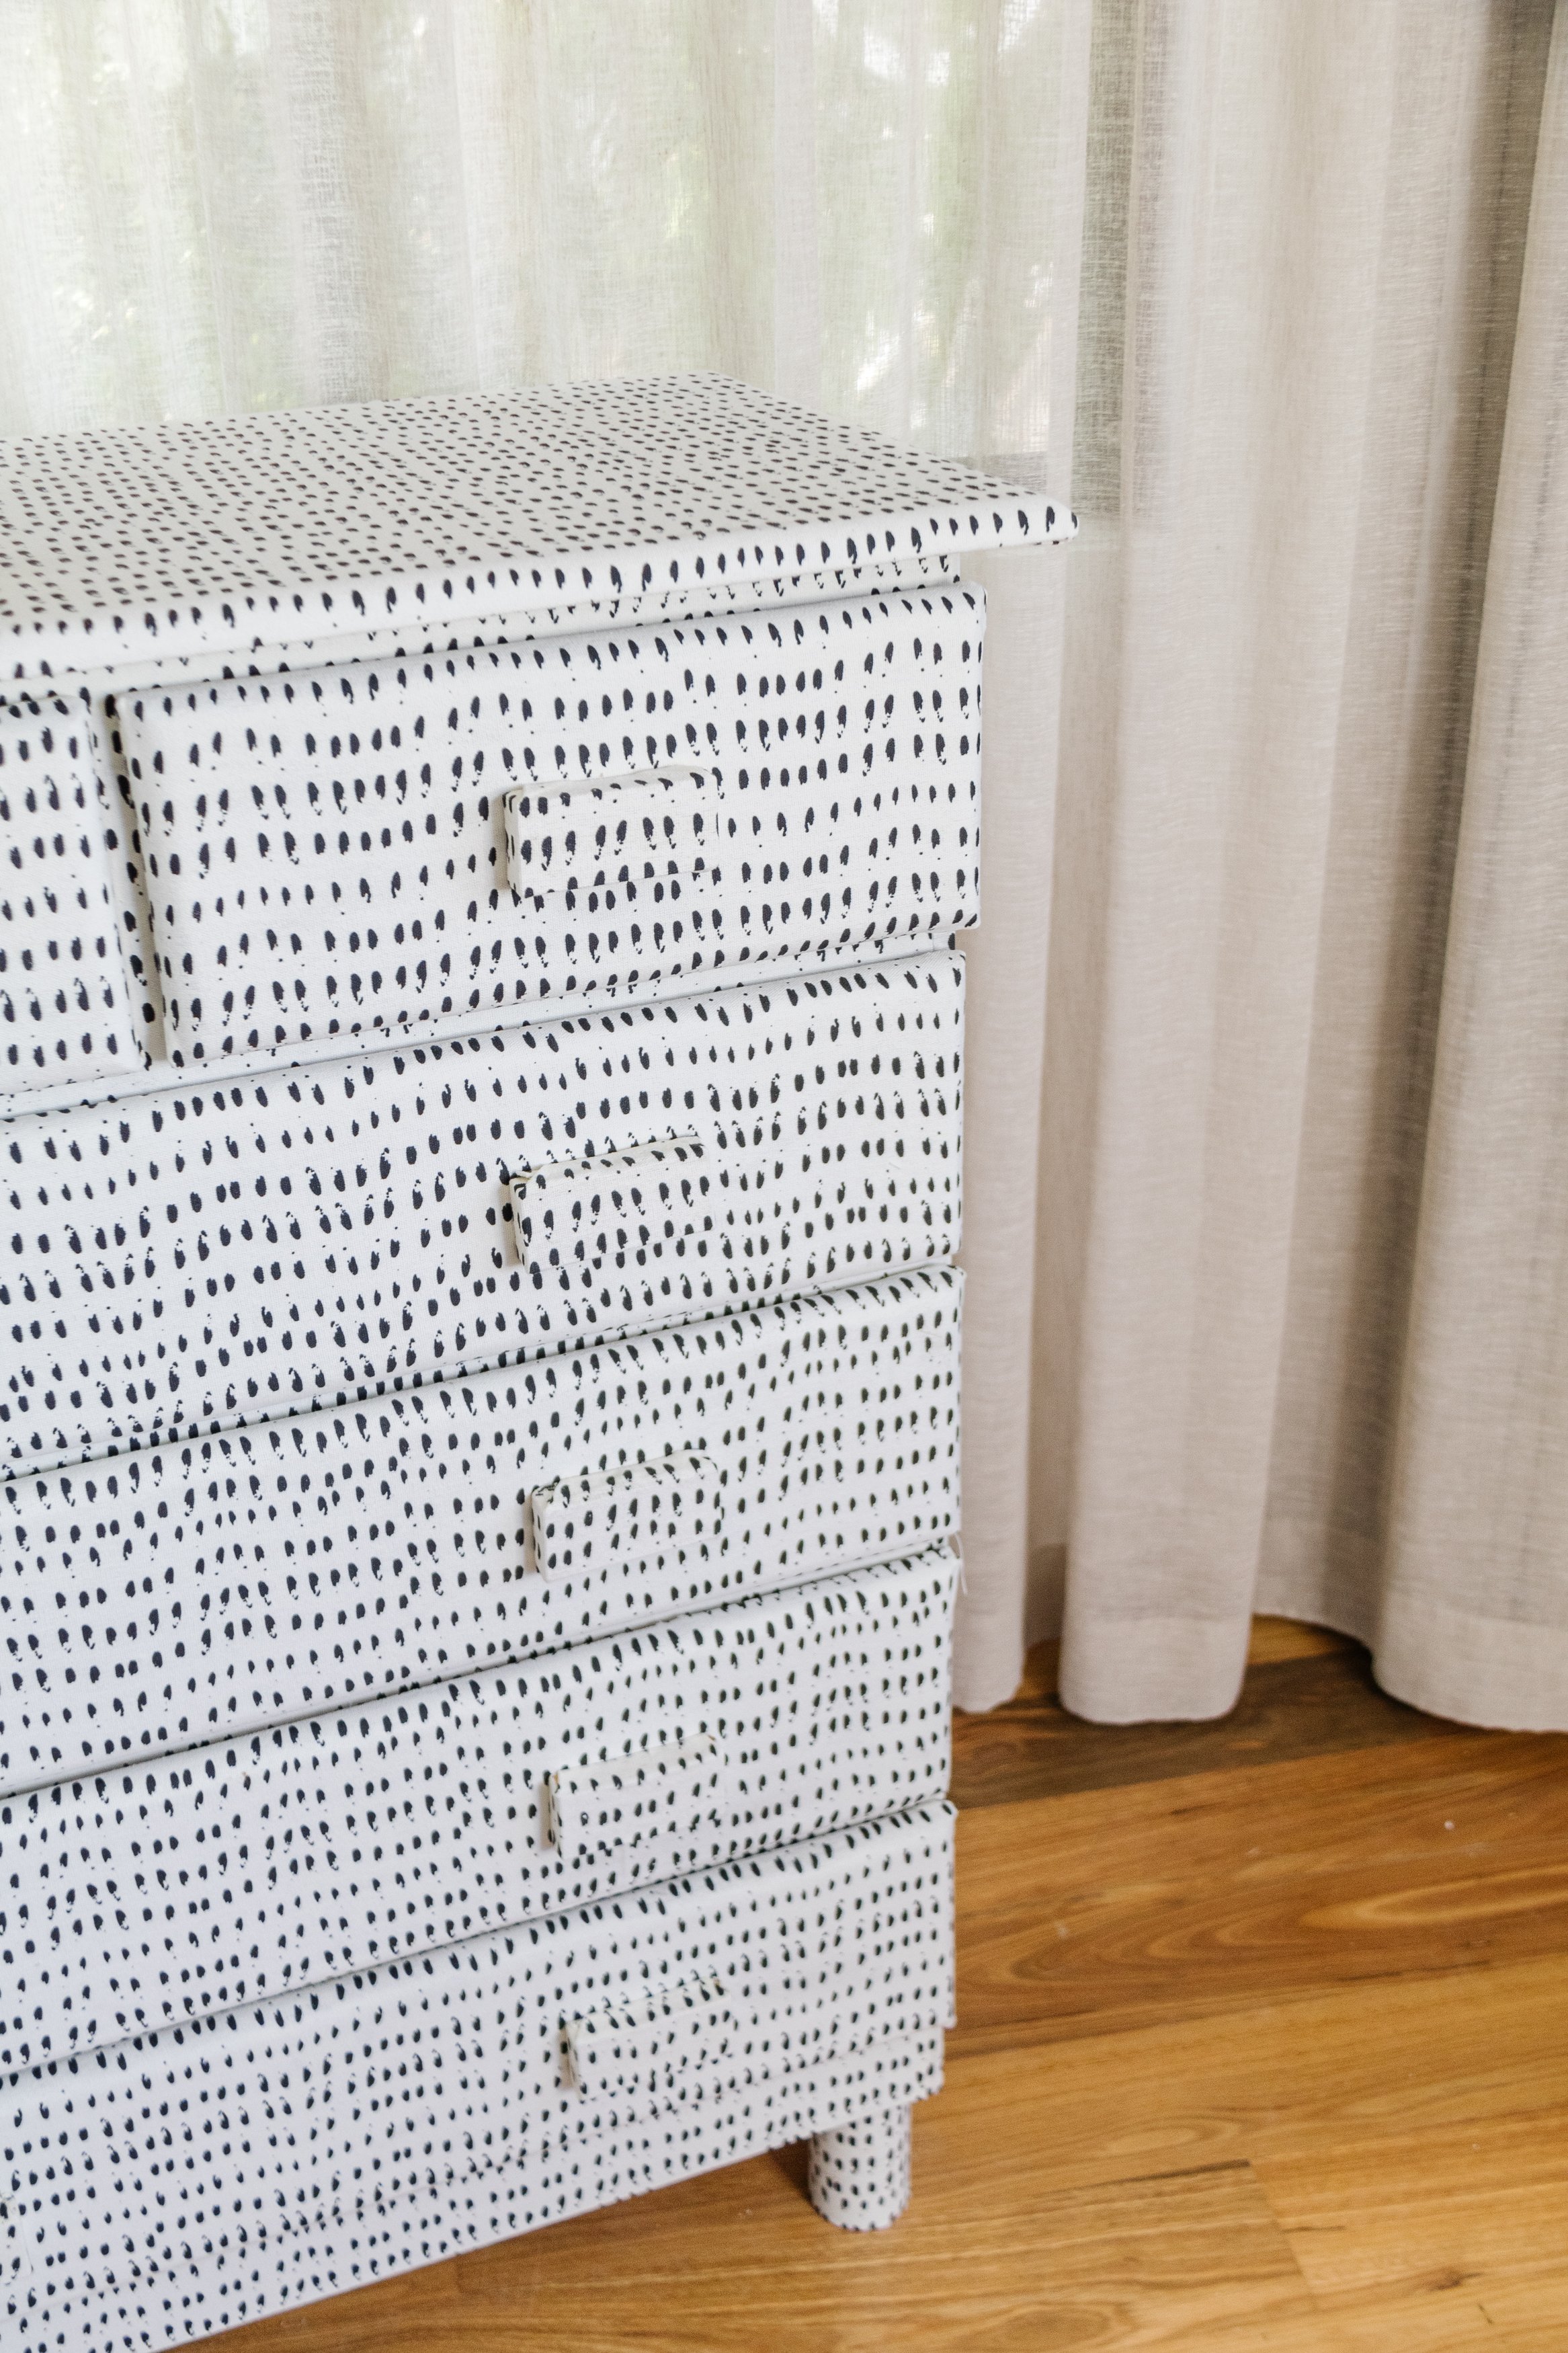 How to Cover Paper Mache Boxes with Fabric - The Polka Dot Chair